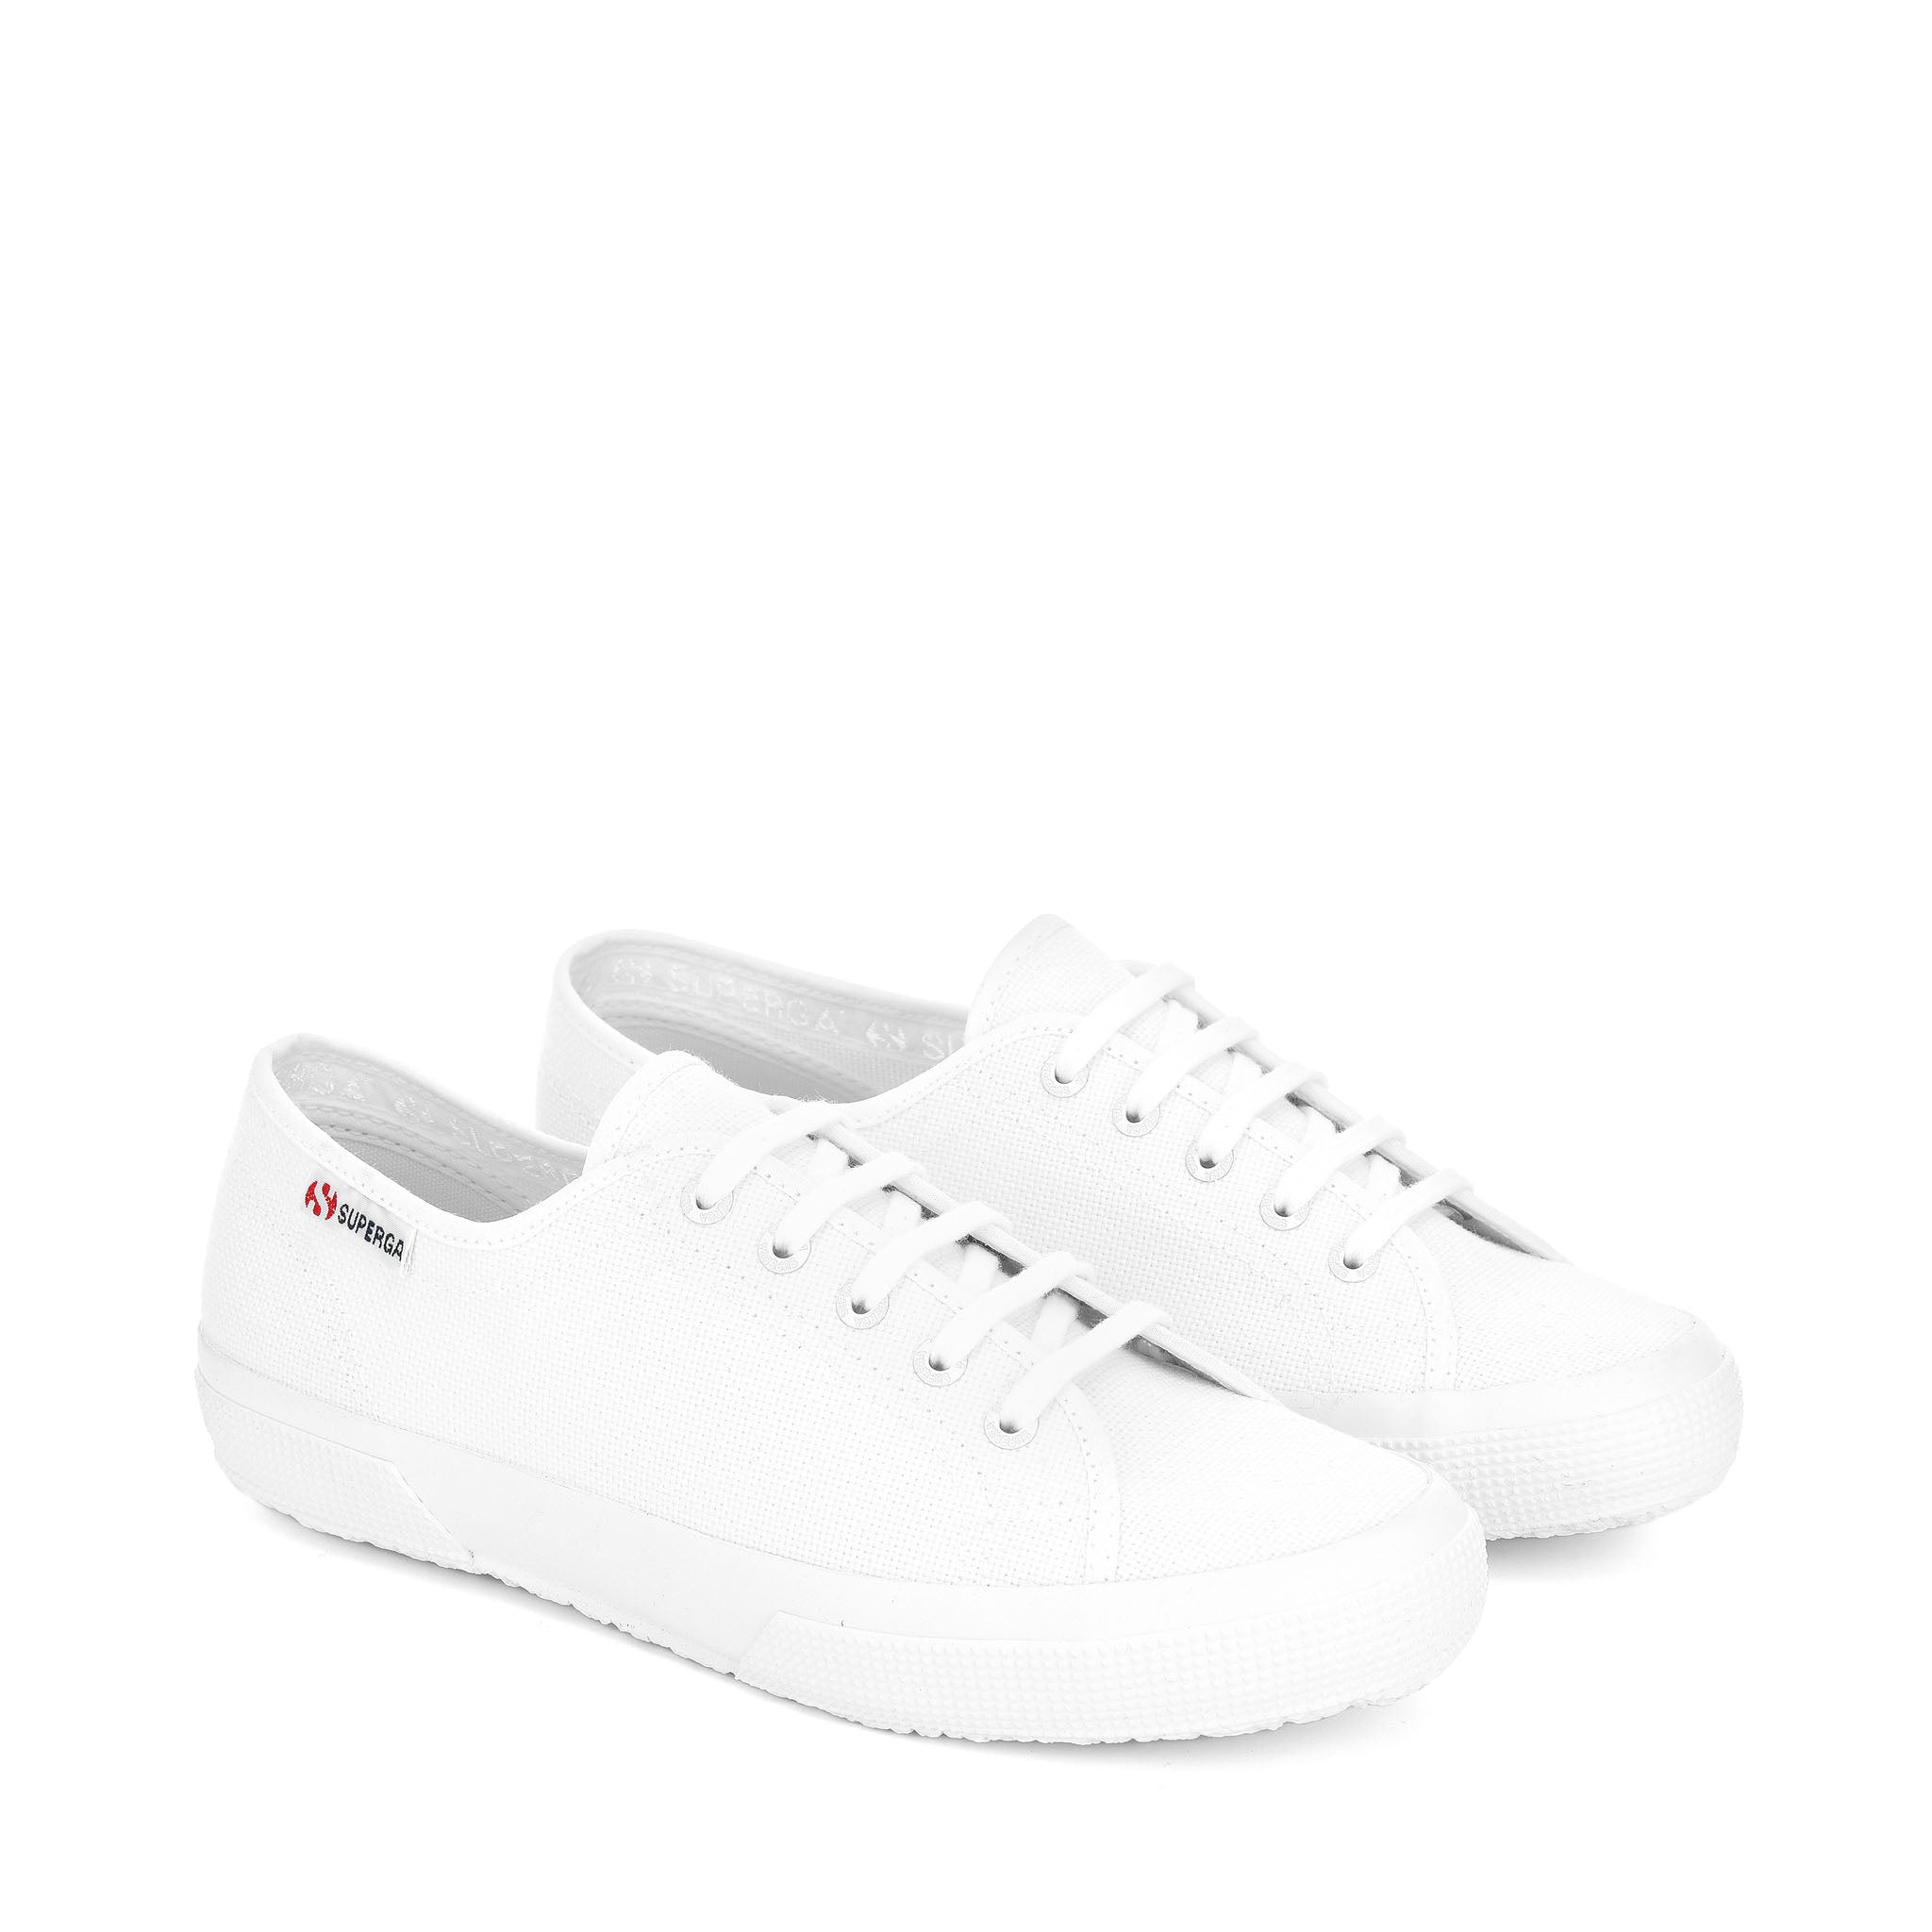 Superga 2725 Nude Sneakers - White Nude. Front view.